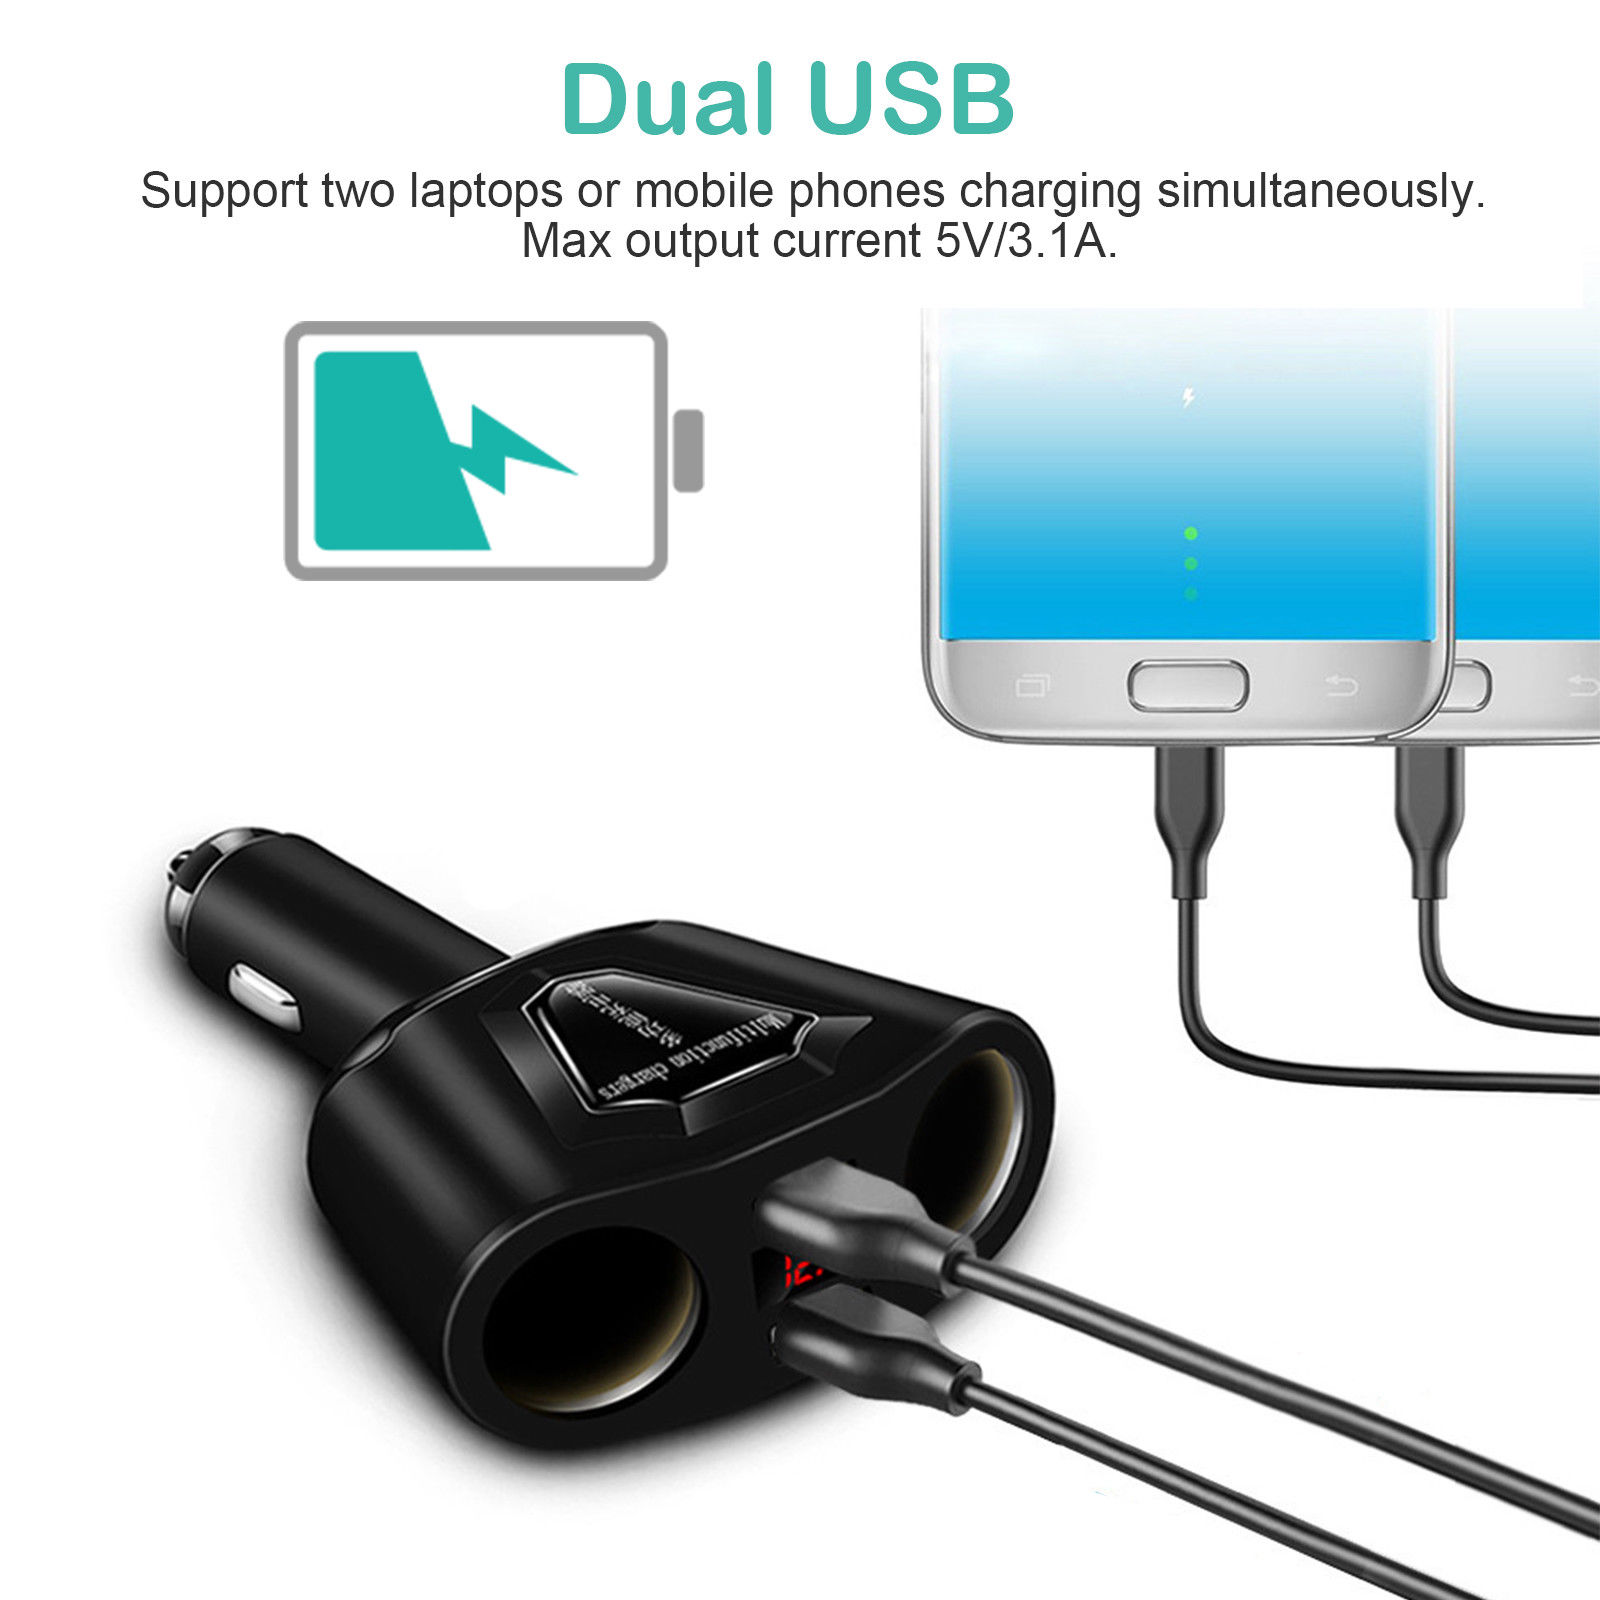 120W 2 Socket Cigarette Lighter Splitter, EEEkit Dual USB Ports 3.1A Fast Charging Socket, Two USB Ports Car Power Charger for Smart Phones, Tablets, GPS Devices - image 3 of 9